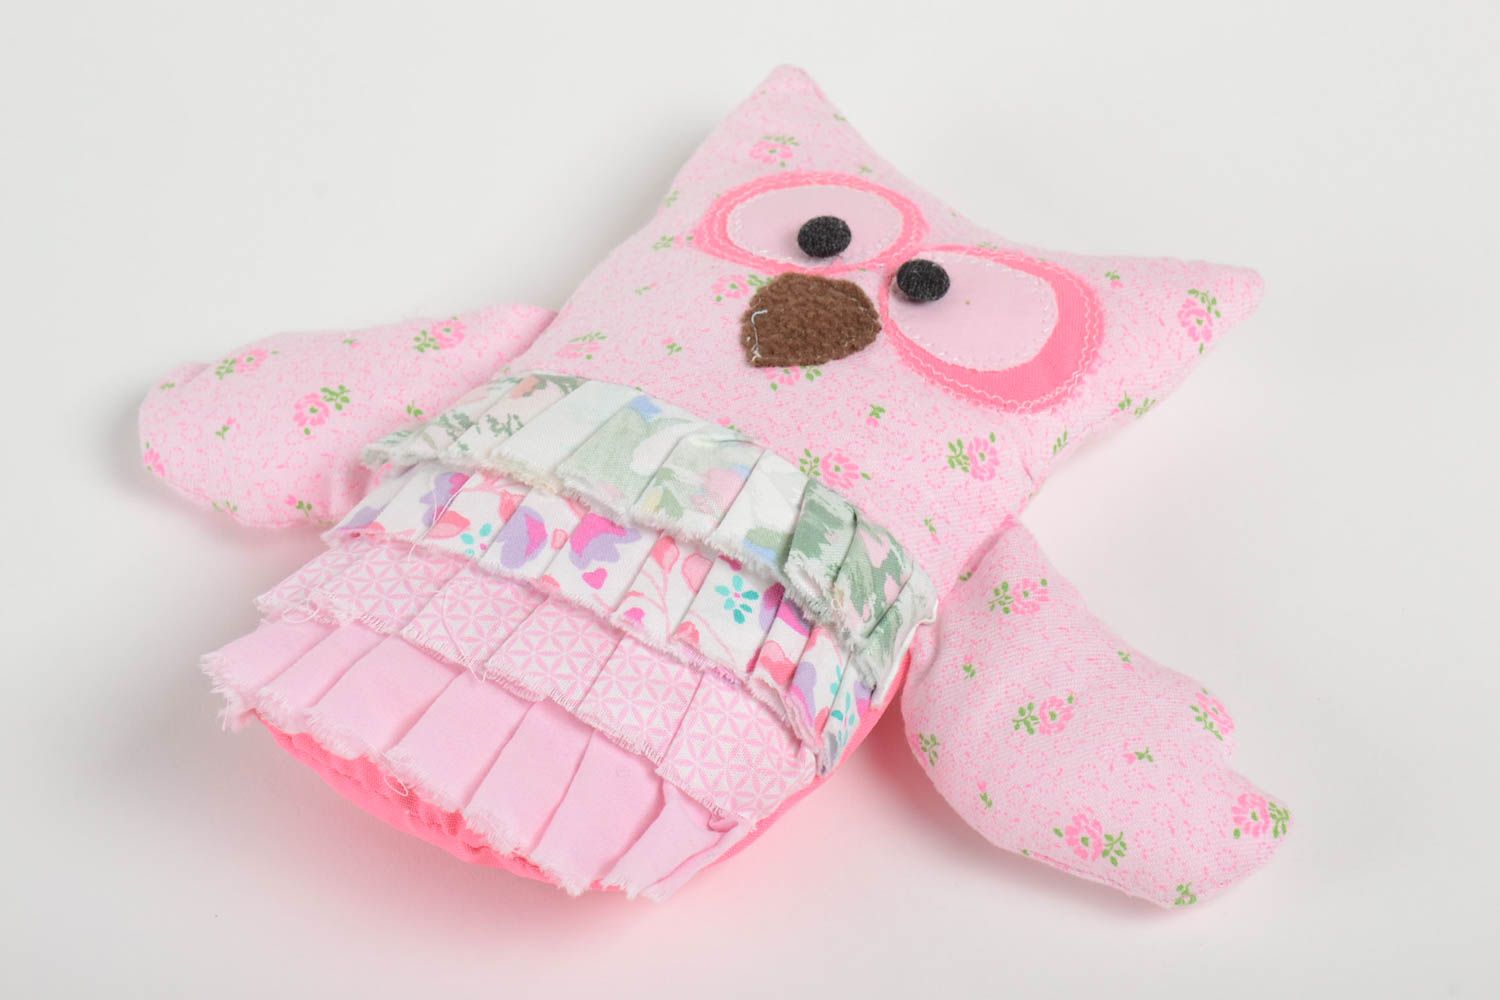 Handmade toy in shape of owl fabric product pink cute gift interior design   photo 3